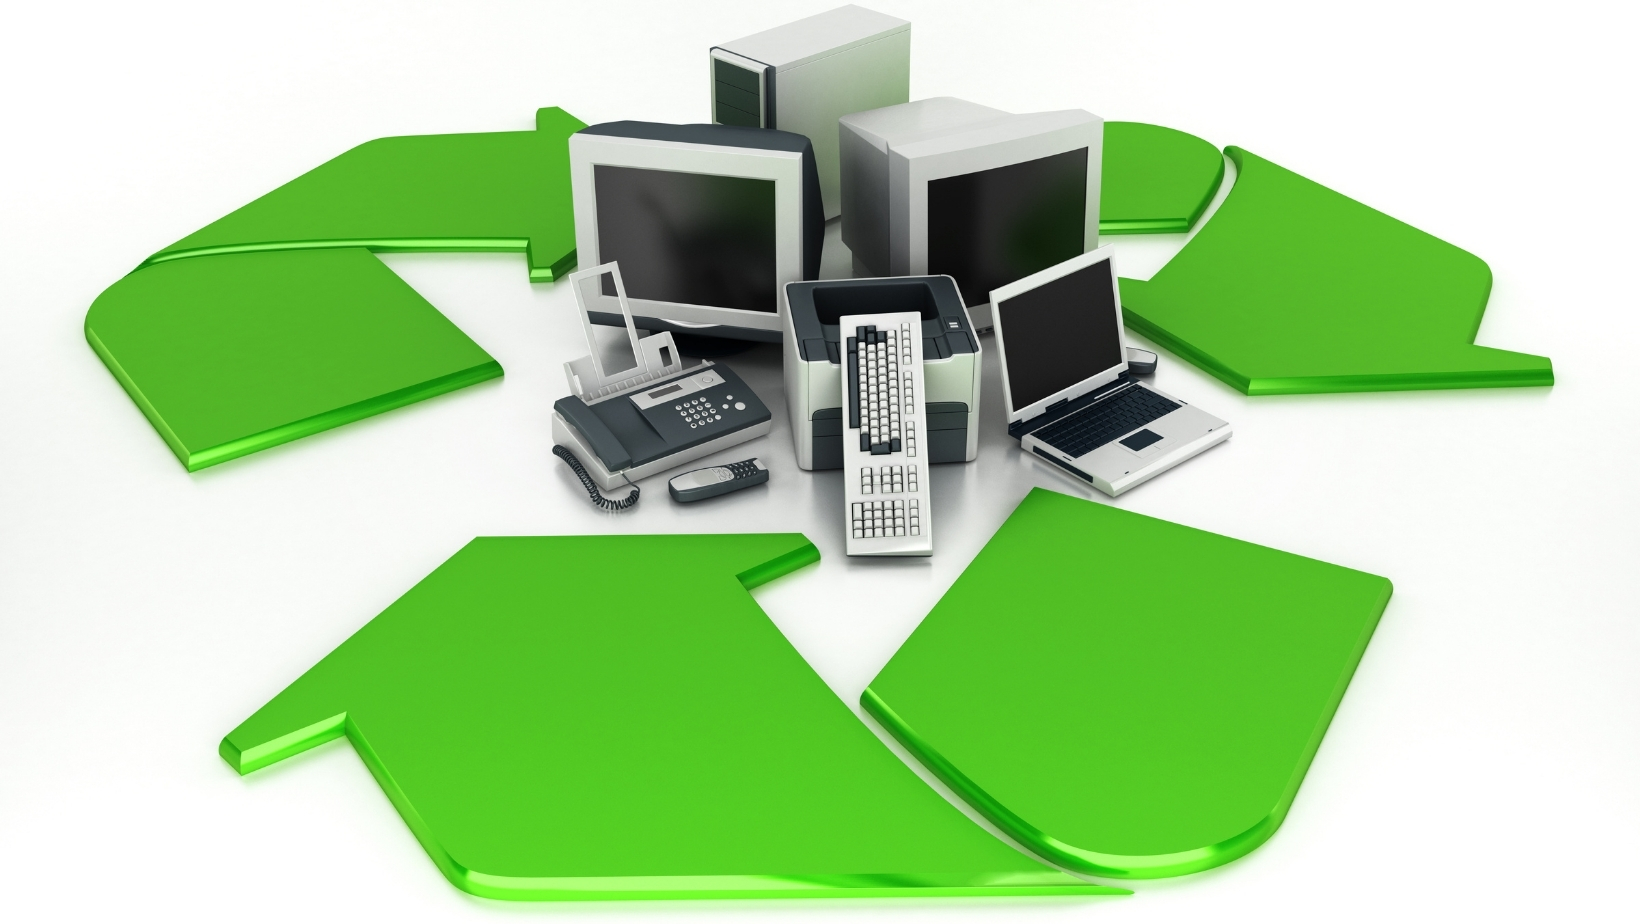 Electronic recycling - safely throw away electronic devices